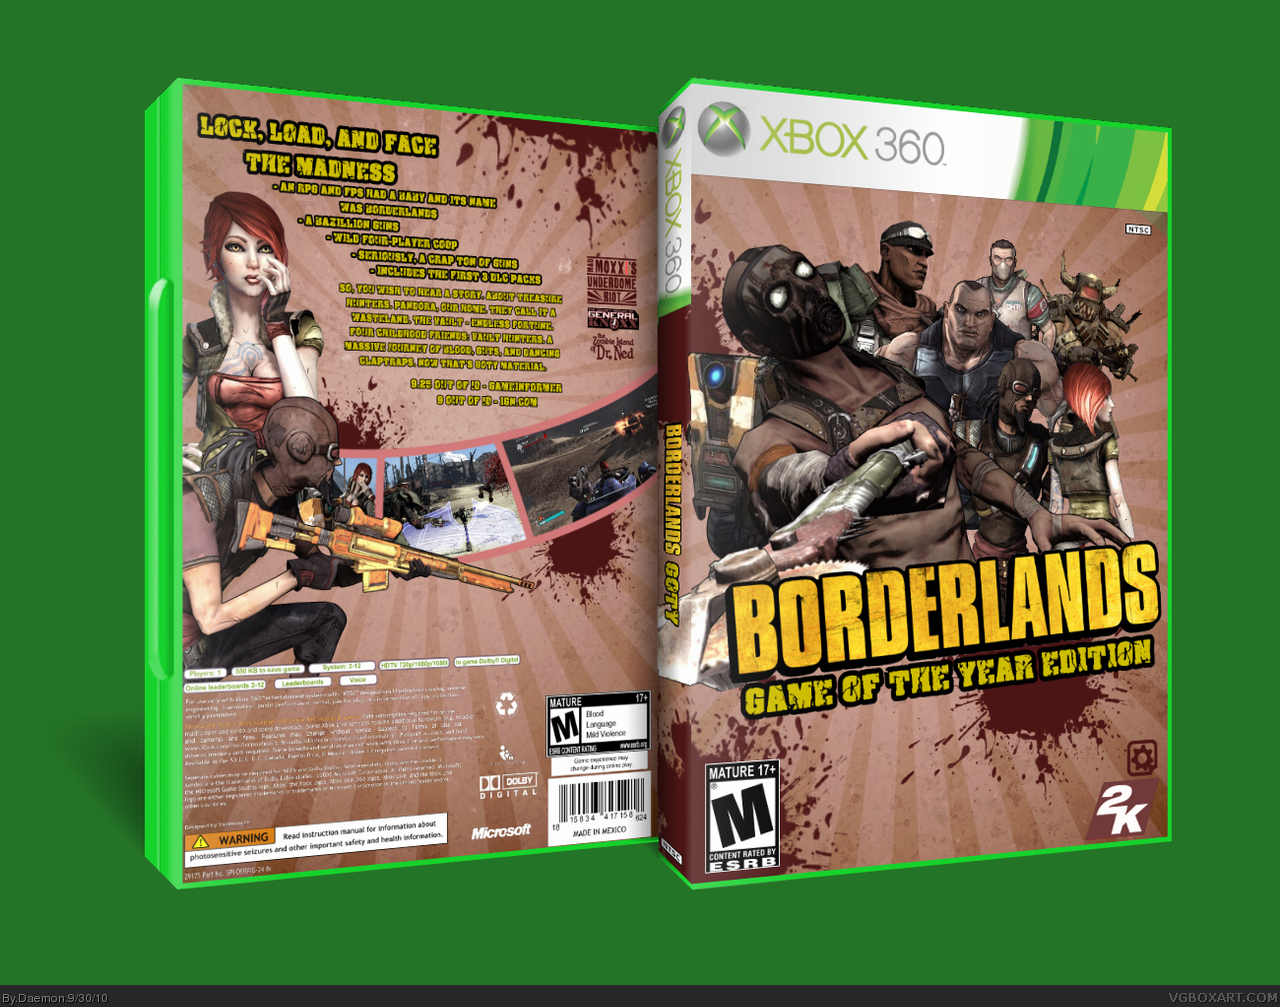 Borderlands: Game of the Year Edition box cover